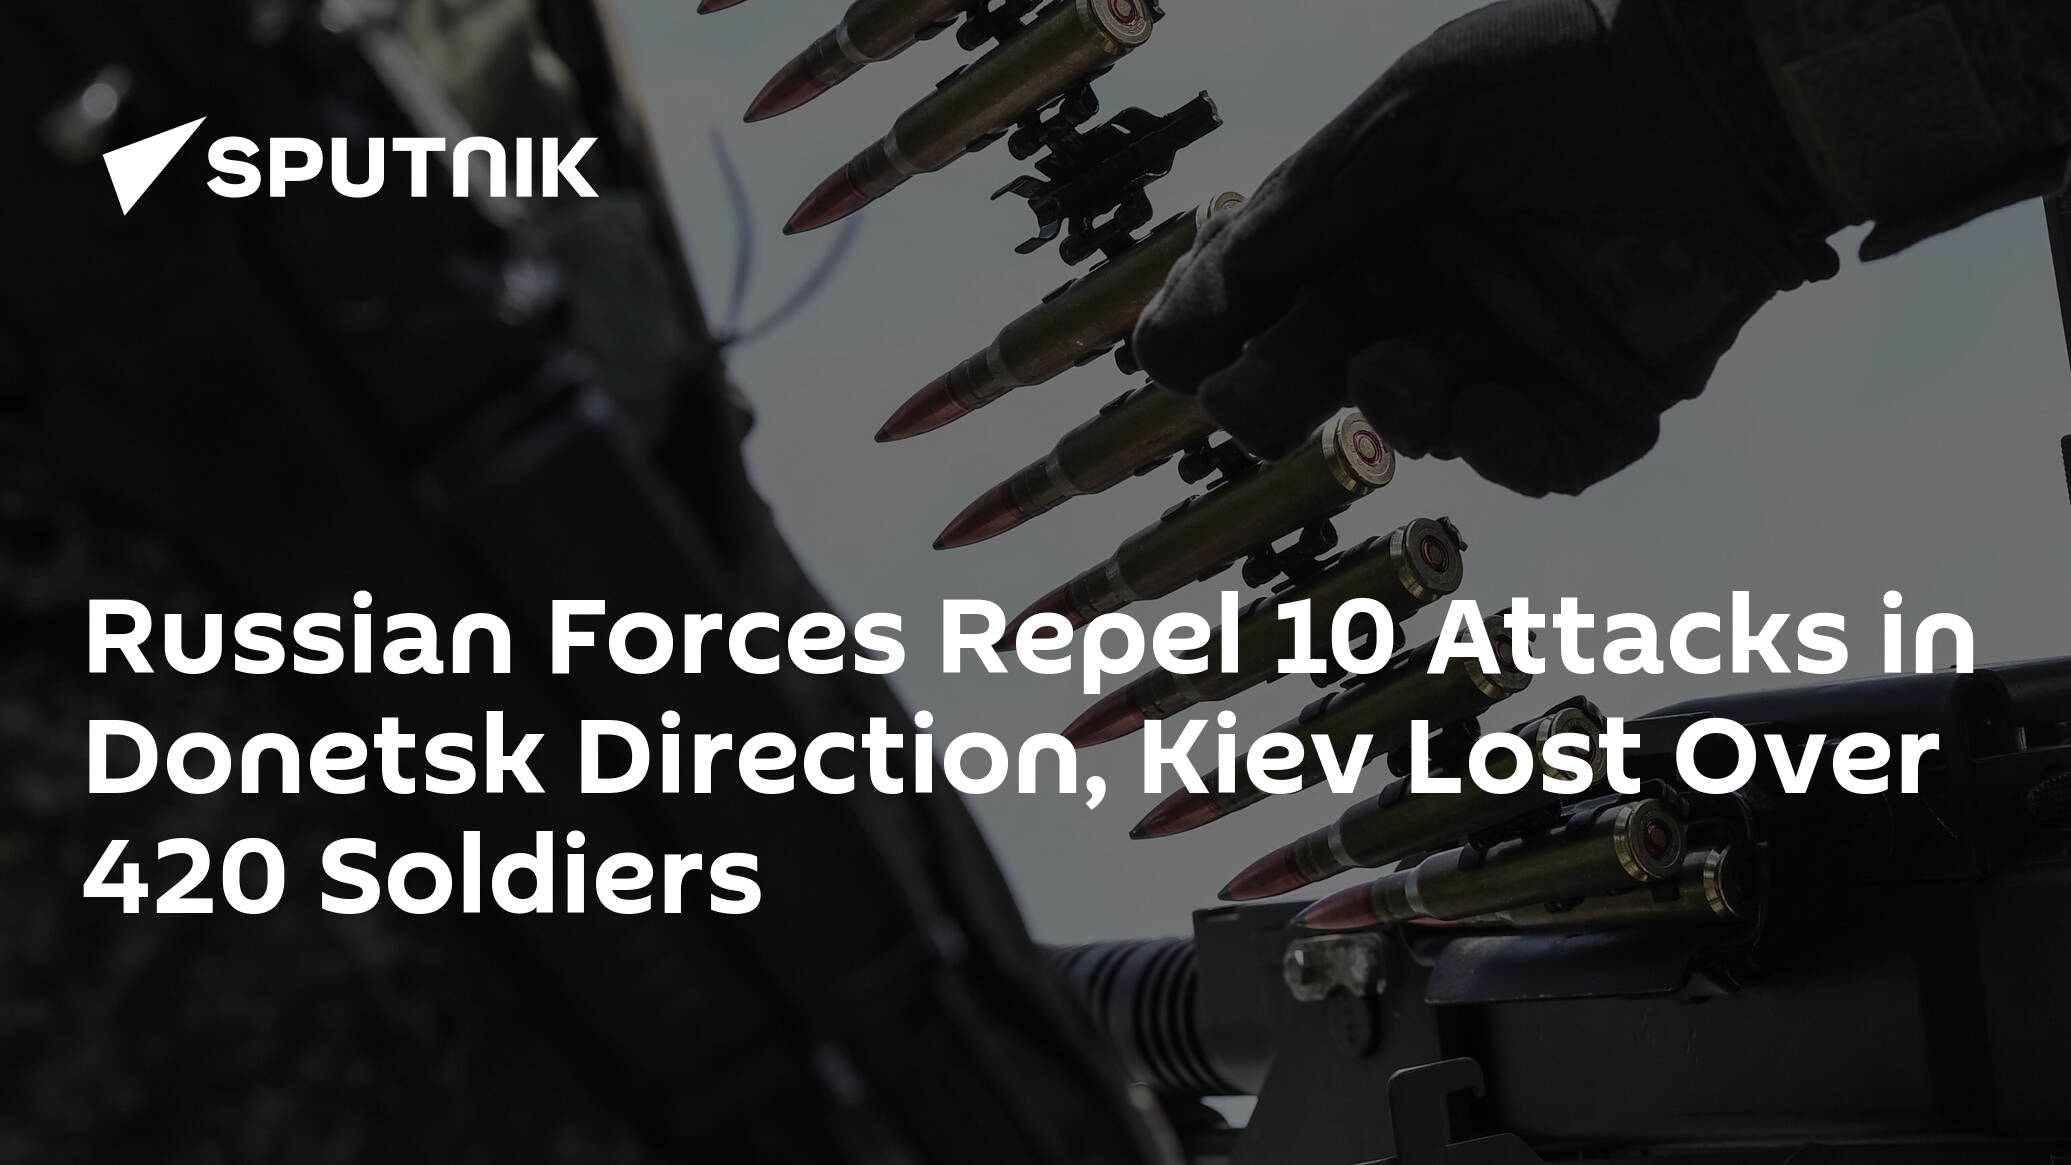 Russian Forces Repel 10 Attacks in Donetsk Direction, Kiev Lost Over 420 Soldiers